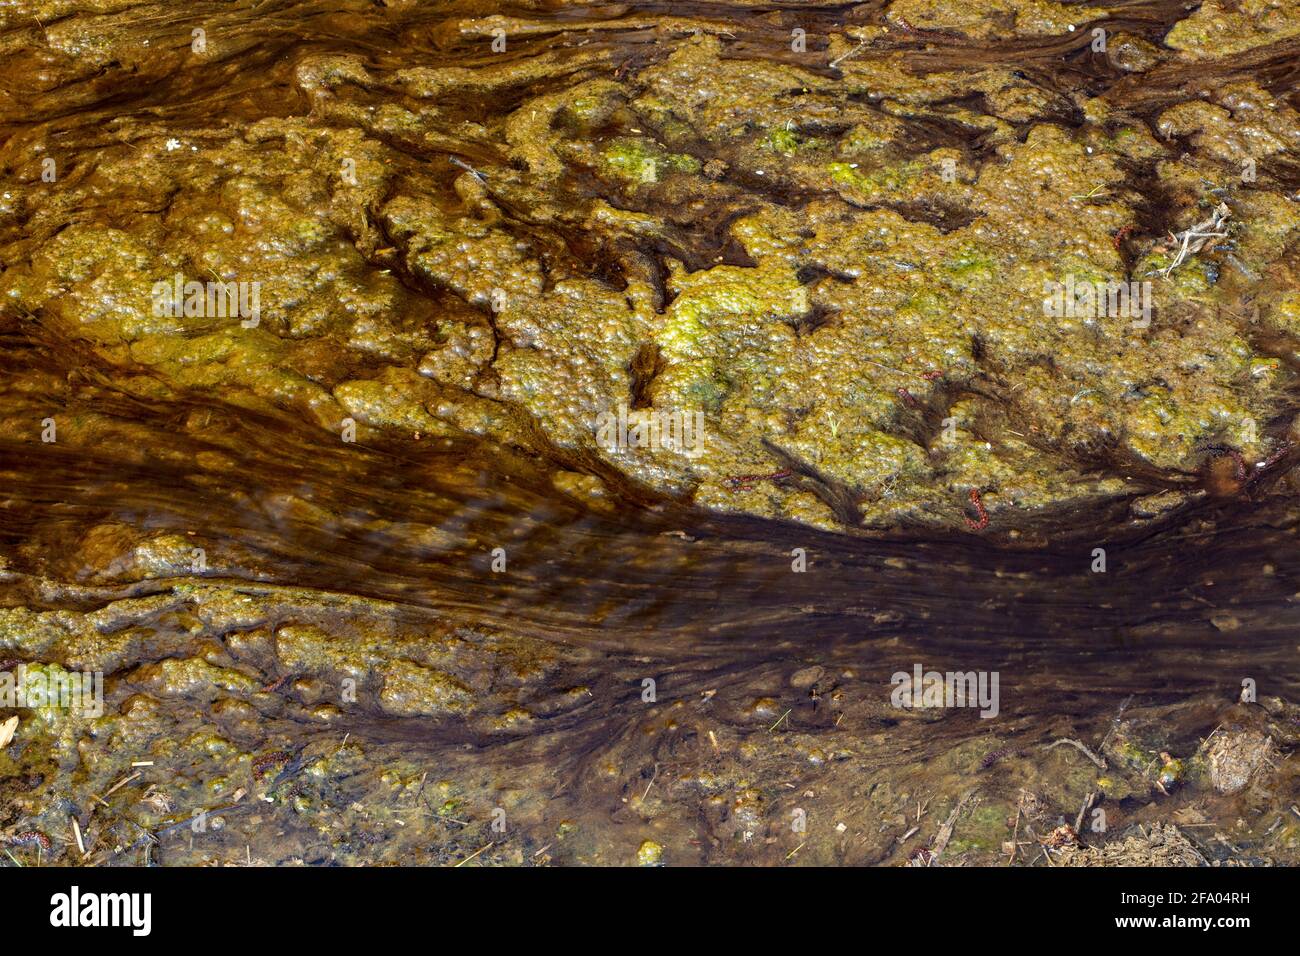 Algae in a slow moving watercourse, natural abstract Stock Photo